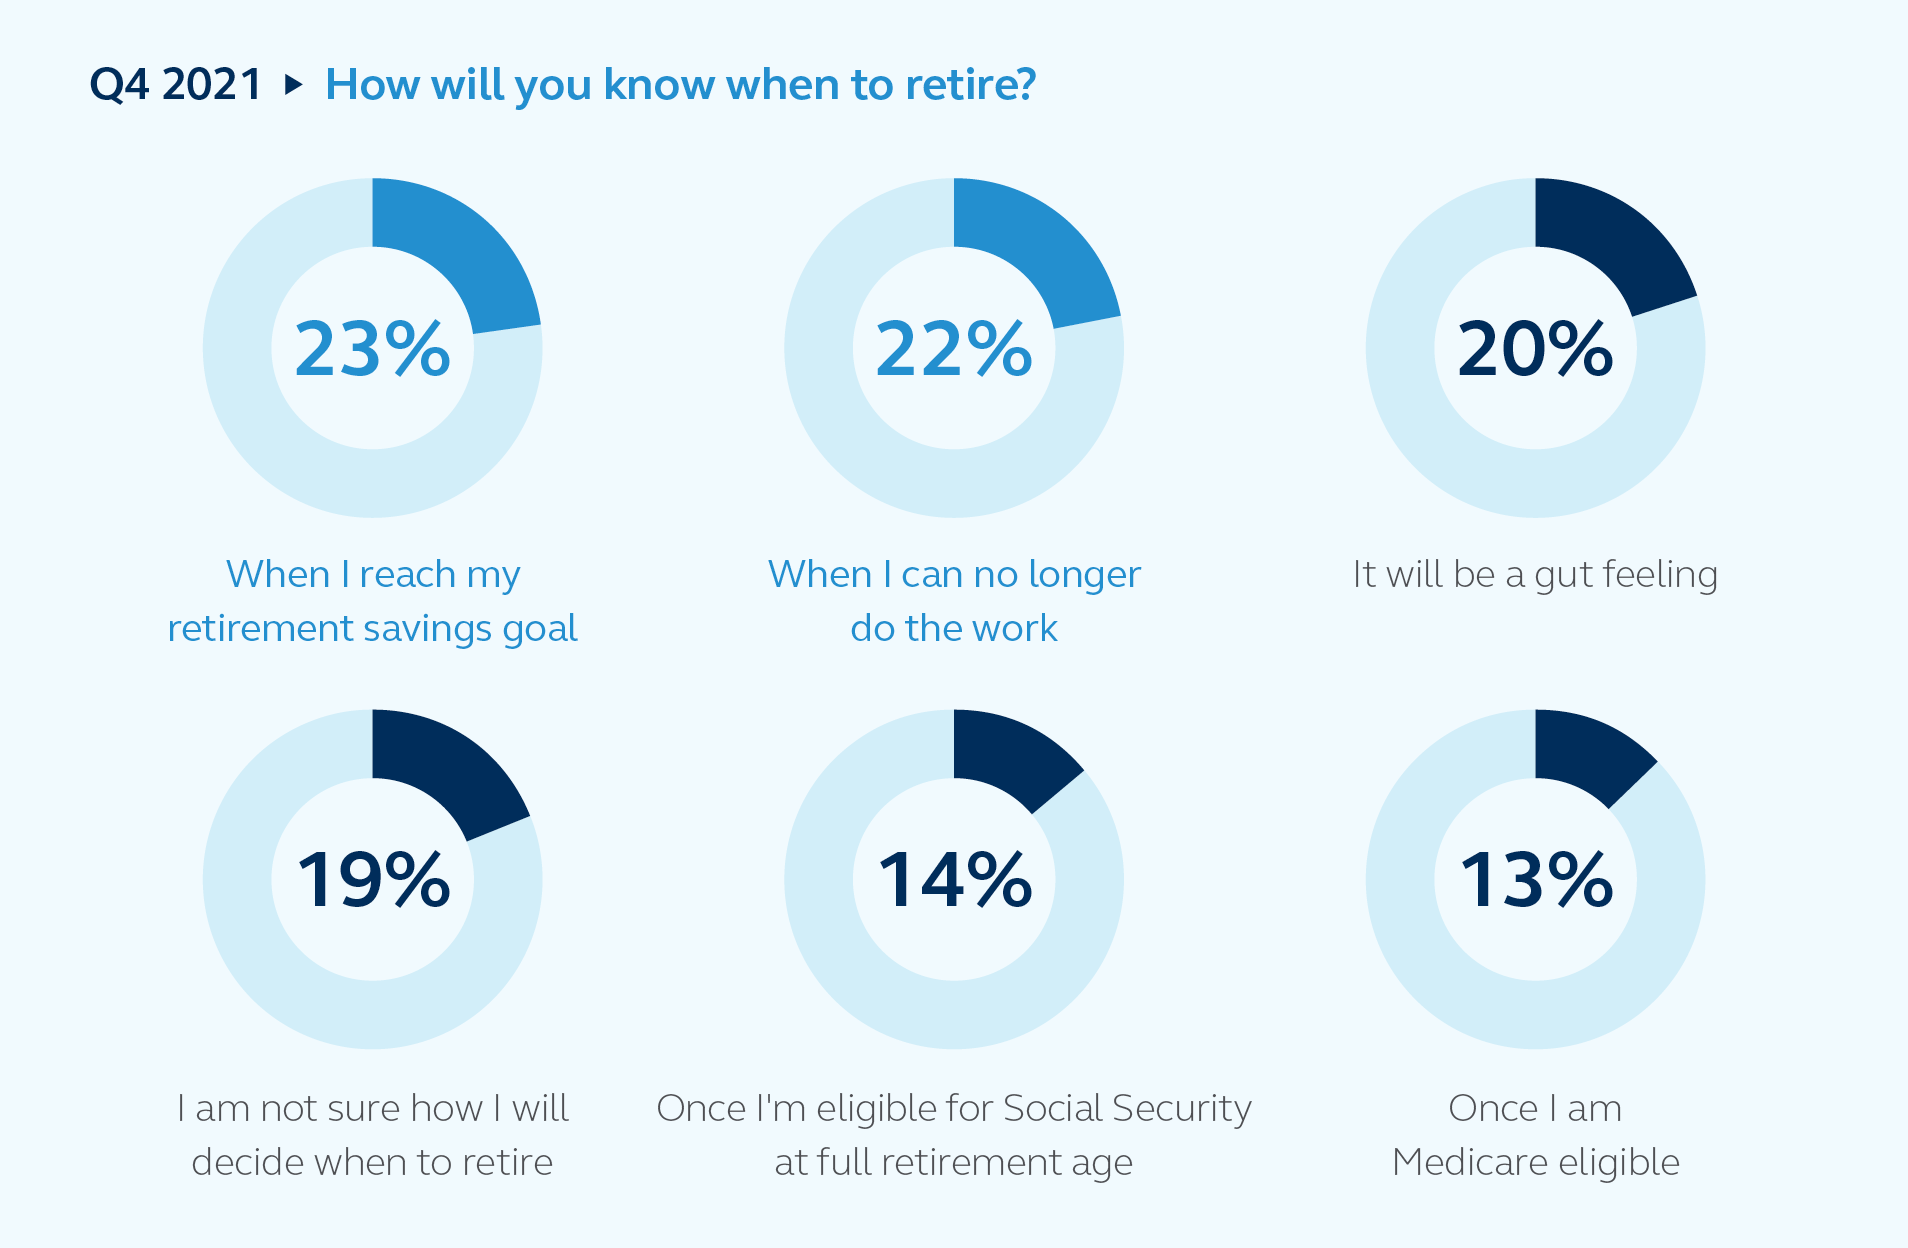 These six pie charts show how people report that they'll know when to retire.